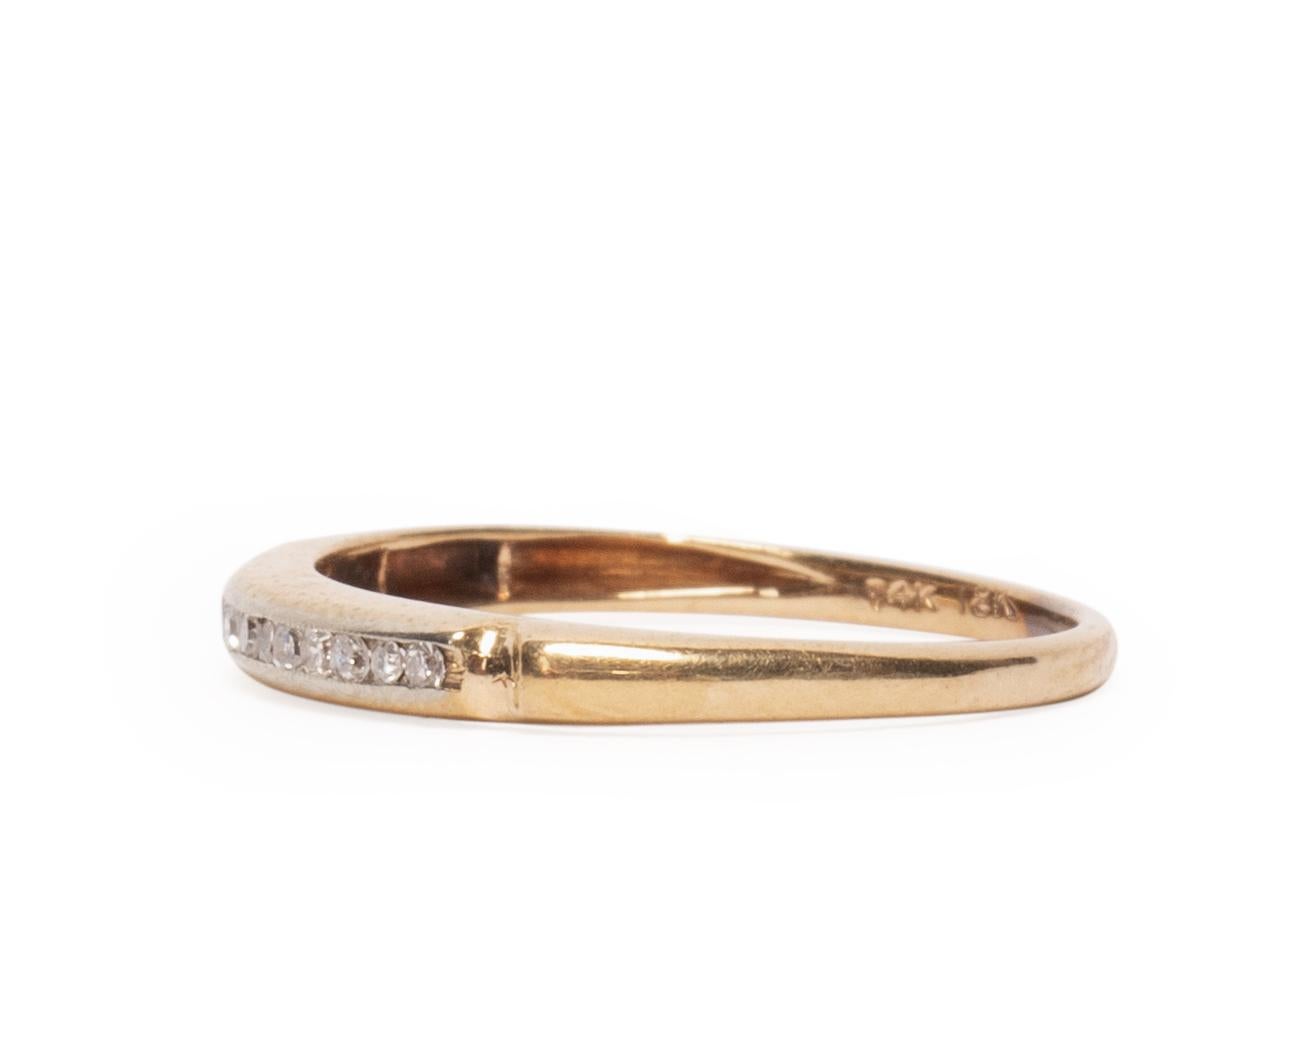 Here we have a beautiful 1940's Art Deco piece that contains 14 gorgeous diamonds set in a 14K white gold channel along the top of the band, leaving the rest of the ring yellow gold giving the two tone effect. With a dainty design on both sides of